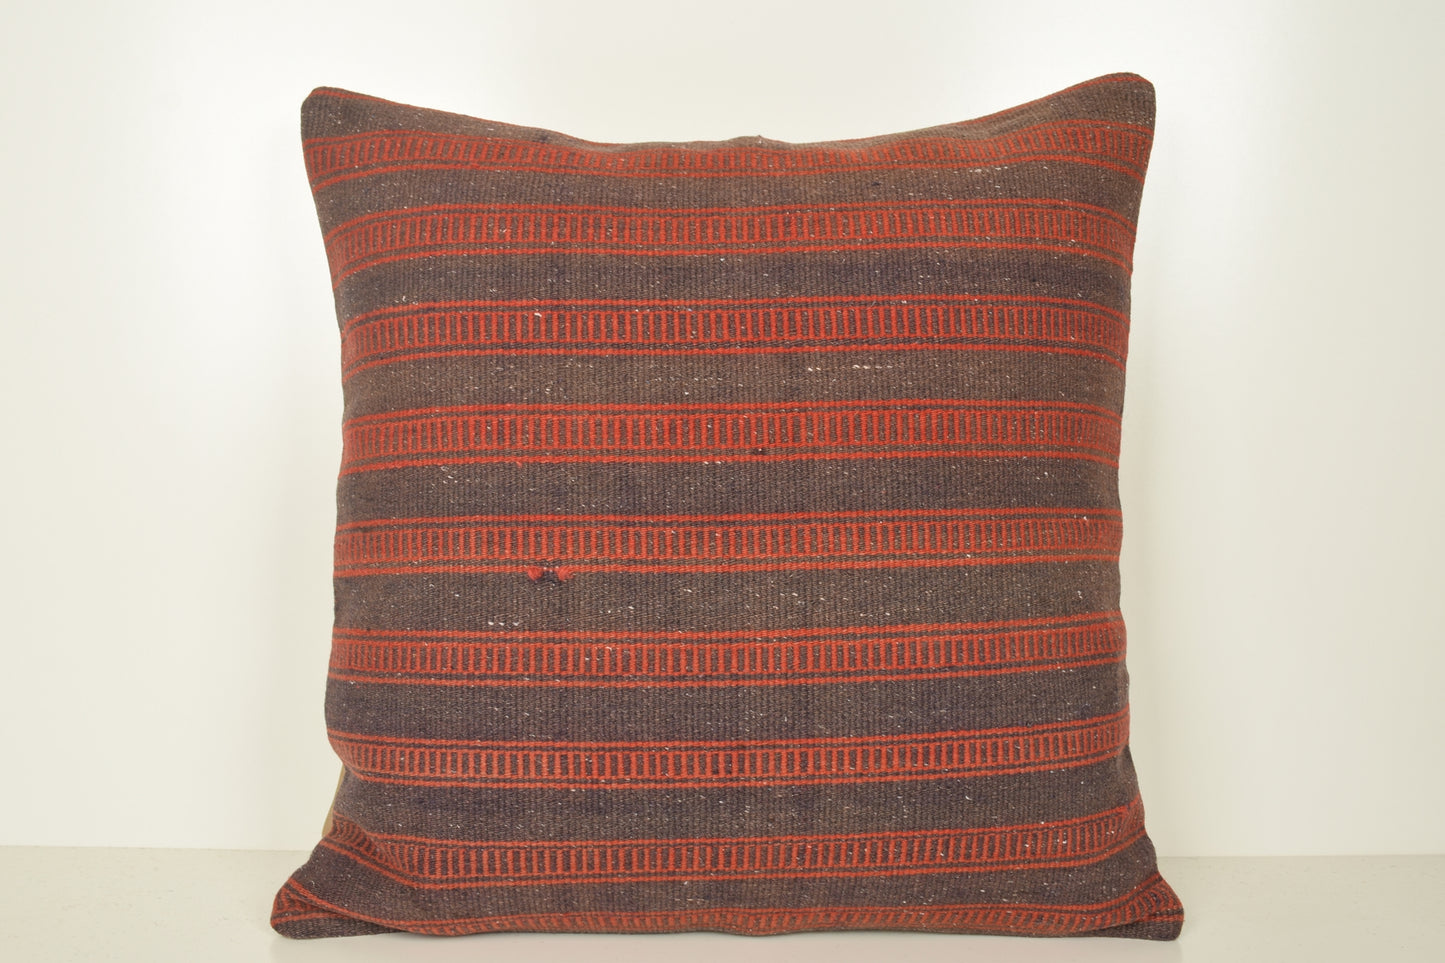 Buy Turkish Pillow A00998 24x24 Handmade Eastern Embroidered